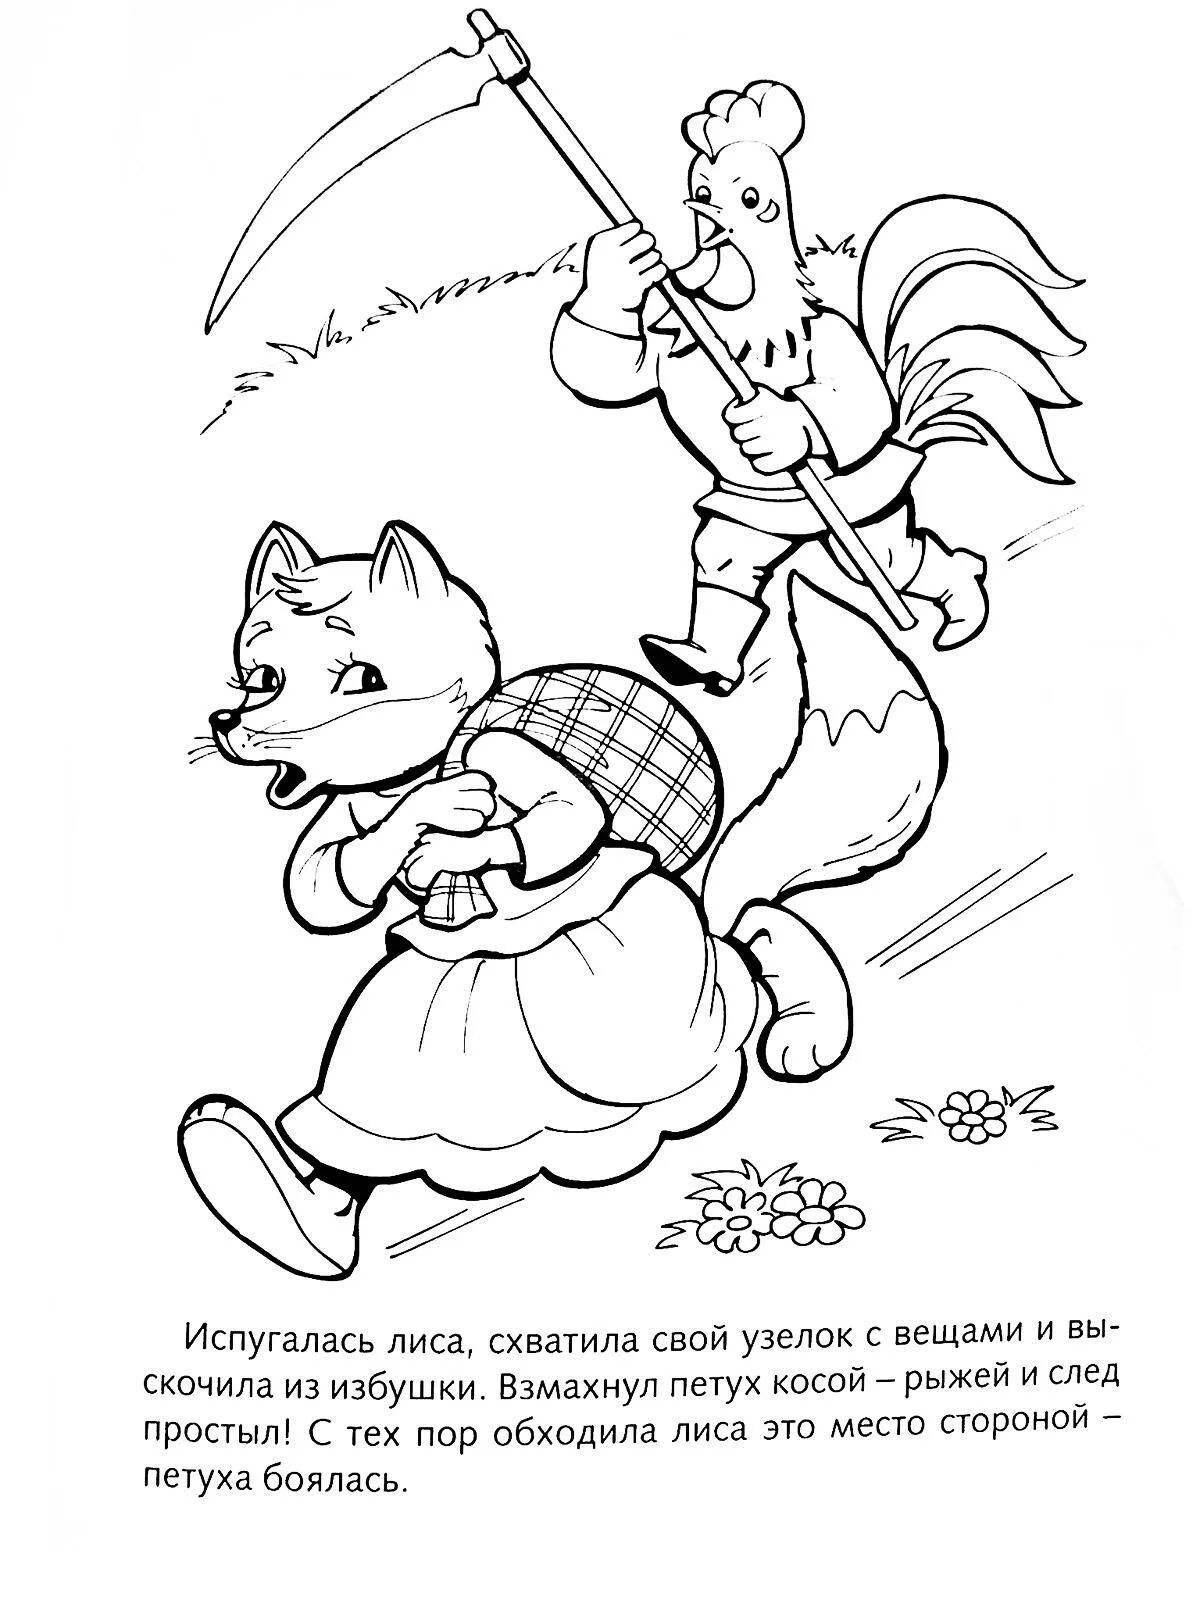 Coloring page blessed Russian folk tales